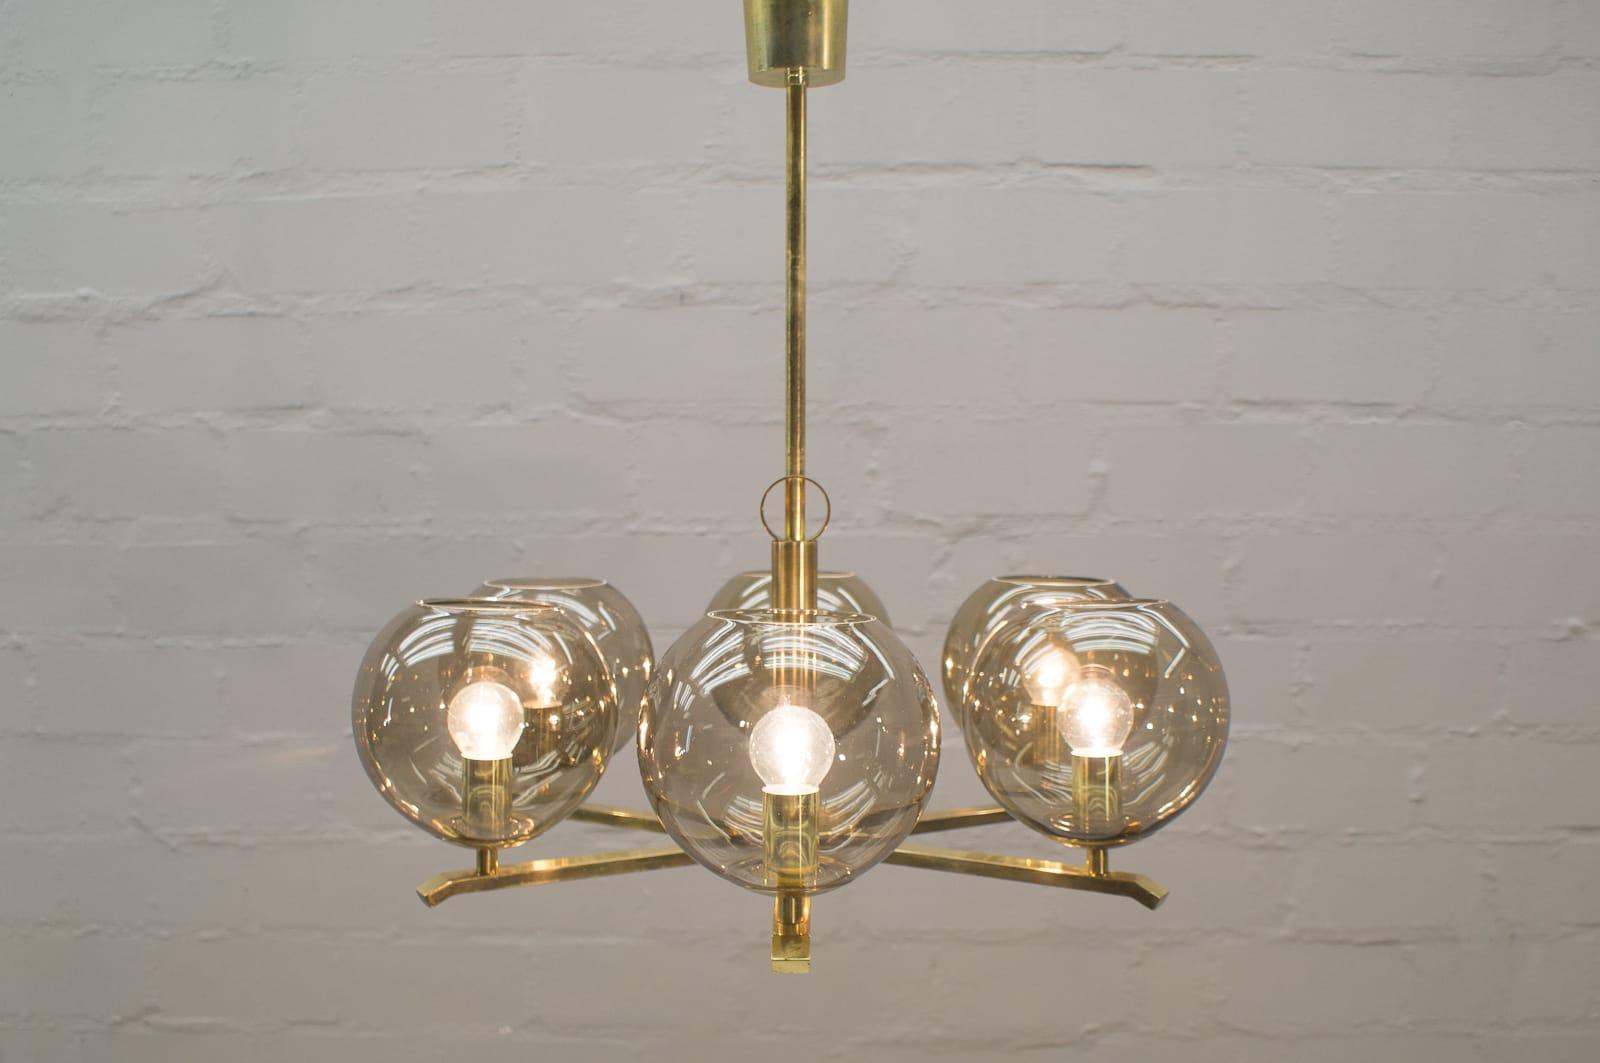 Elegant 1960s Brass Ceiling Lamp with 8 Smoked Glass Globes, Germany In Good Condition For Sale In Nürnberg, Bayern